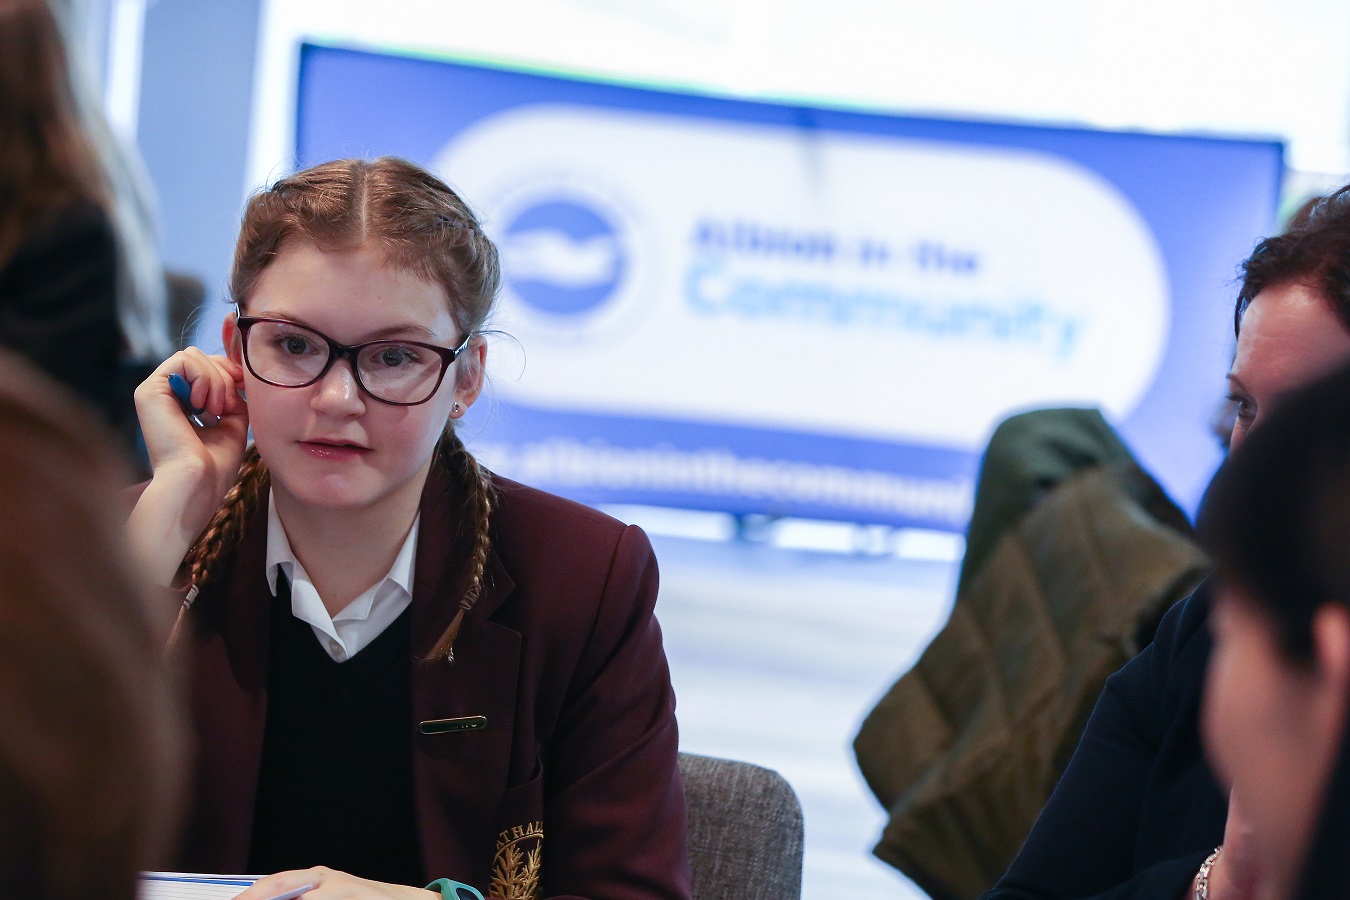 Successful event aimed to encourage more girls to take up STEM subjects at GCSE